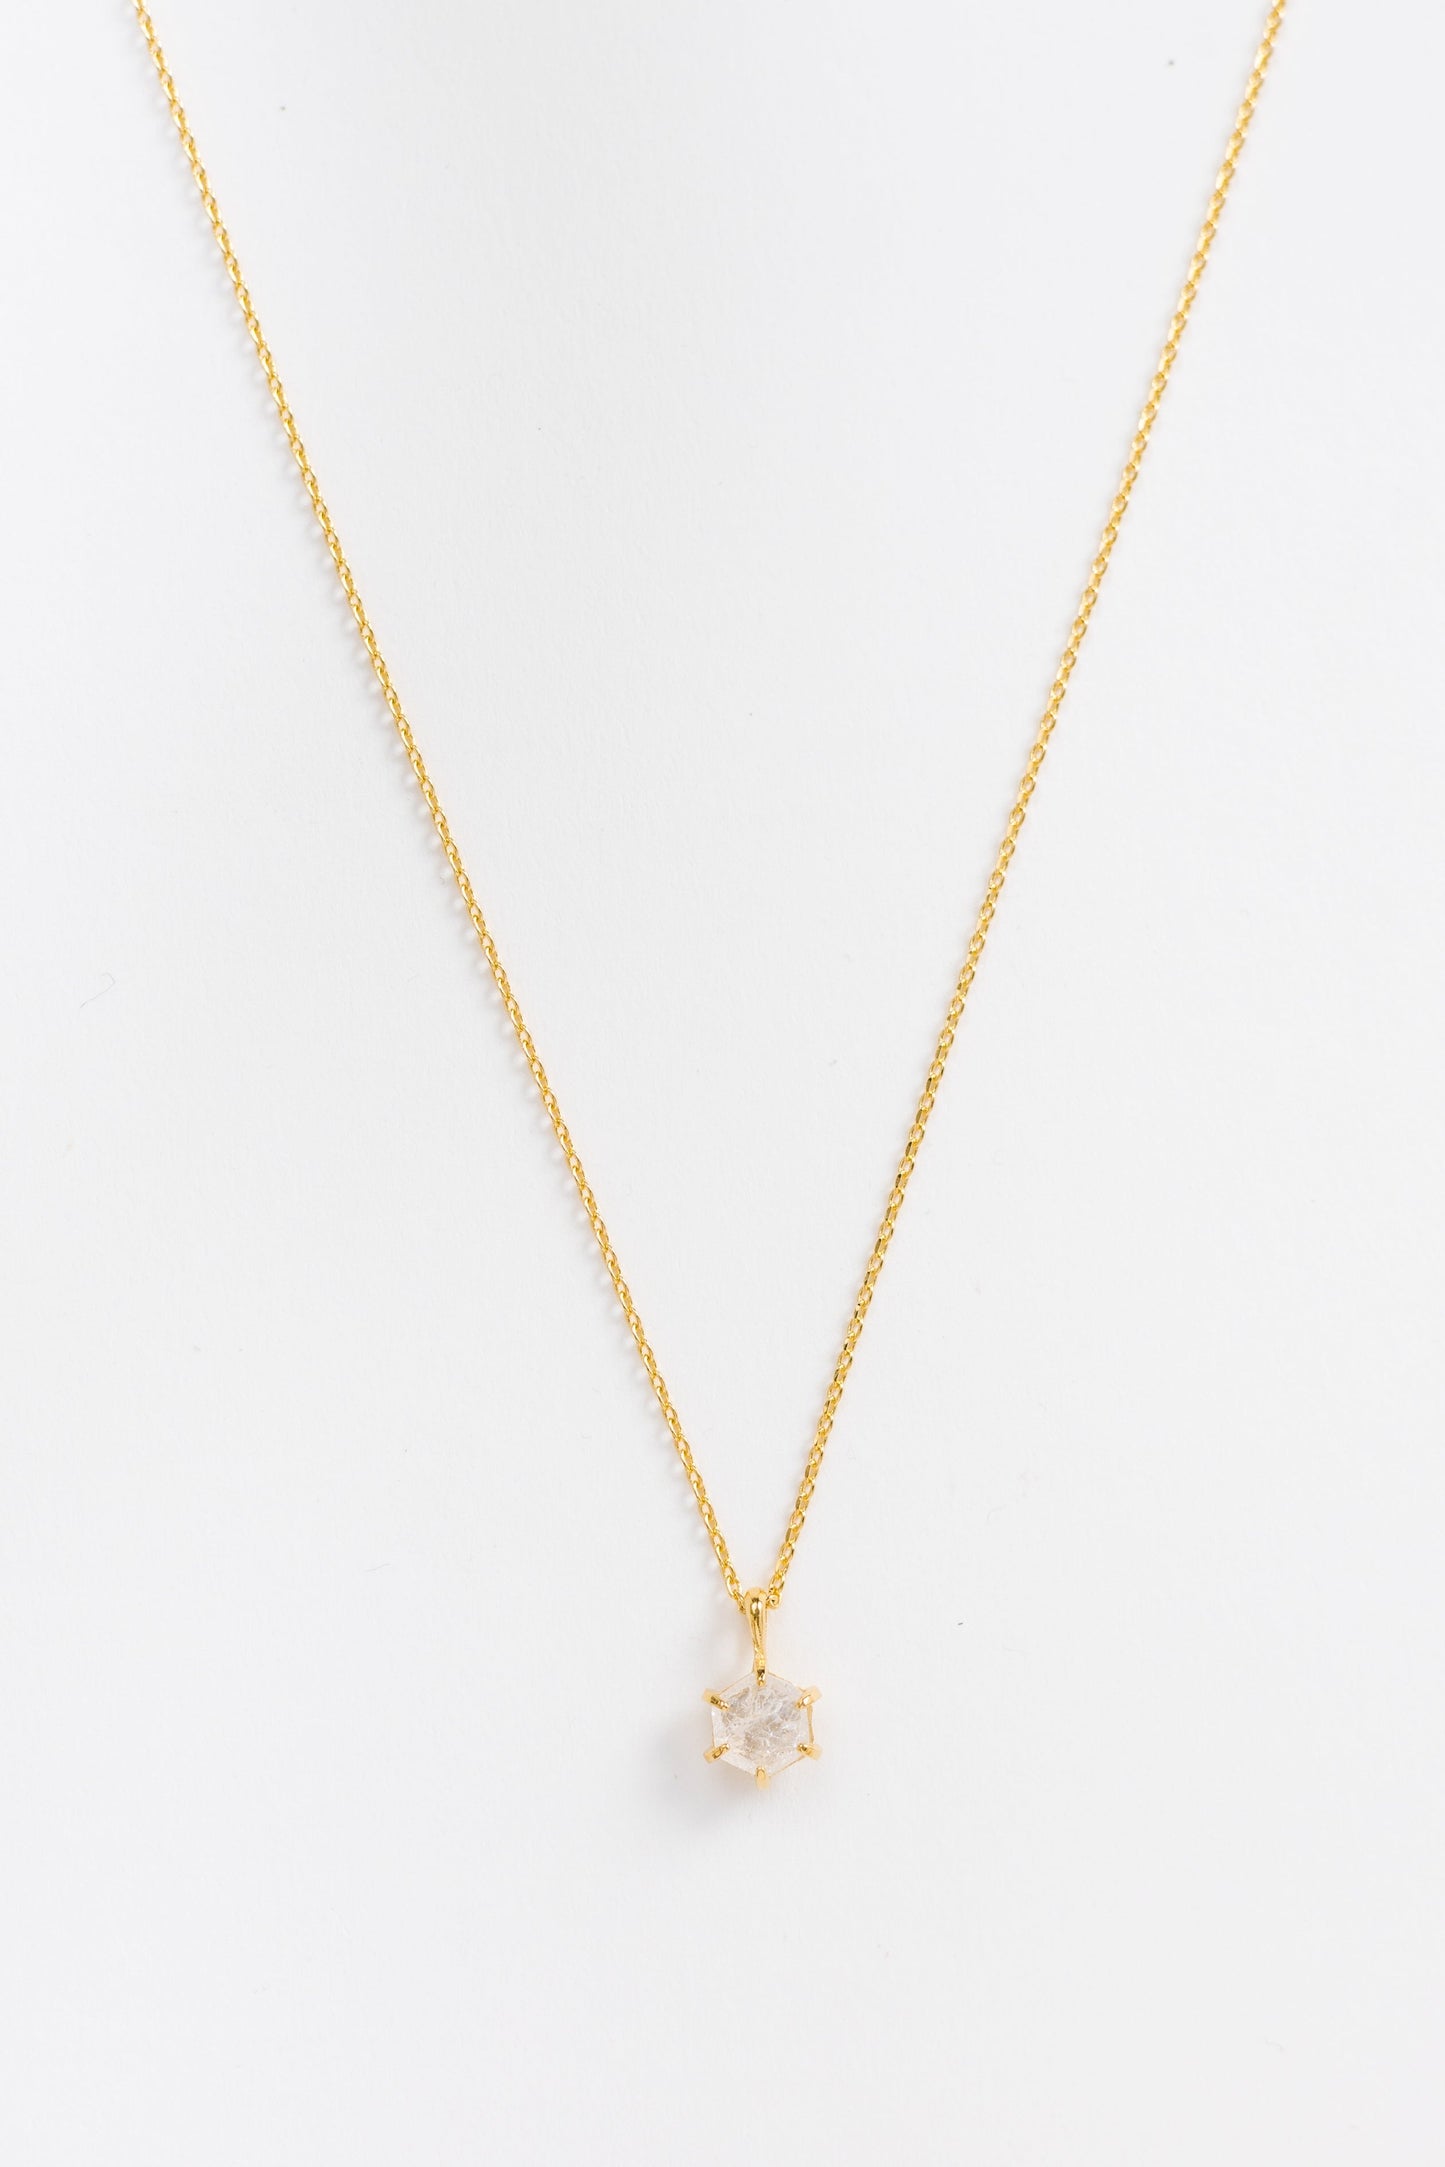 Cove Windsor Necklace WOMEN'S NECKLACE Cove Accessories Gold 16" 